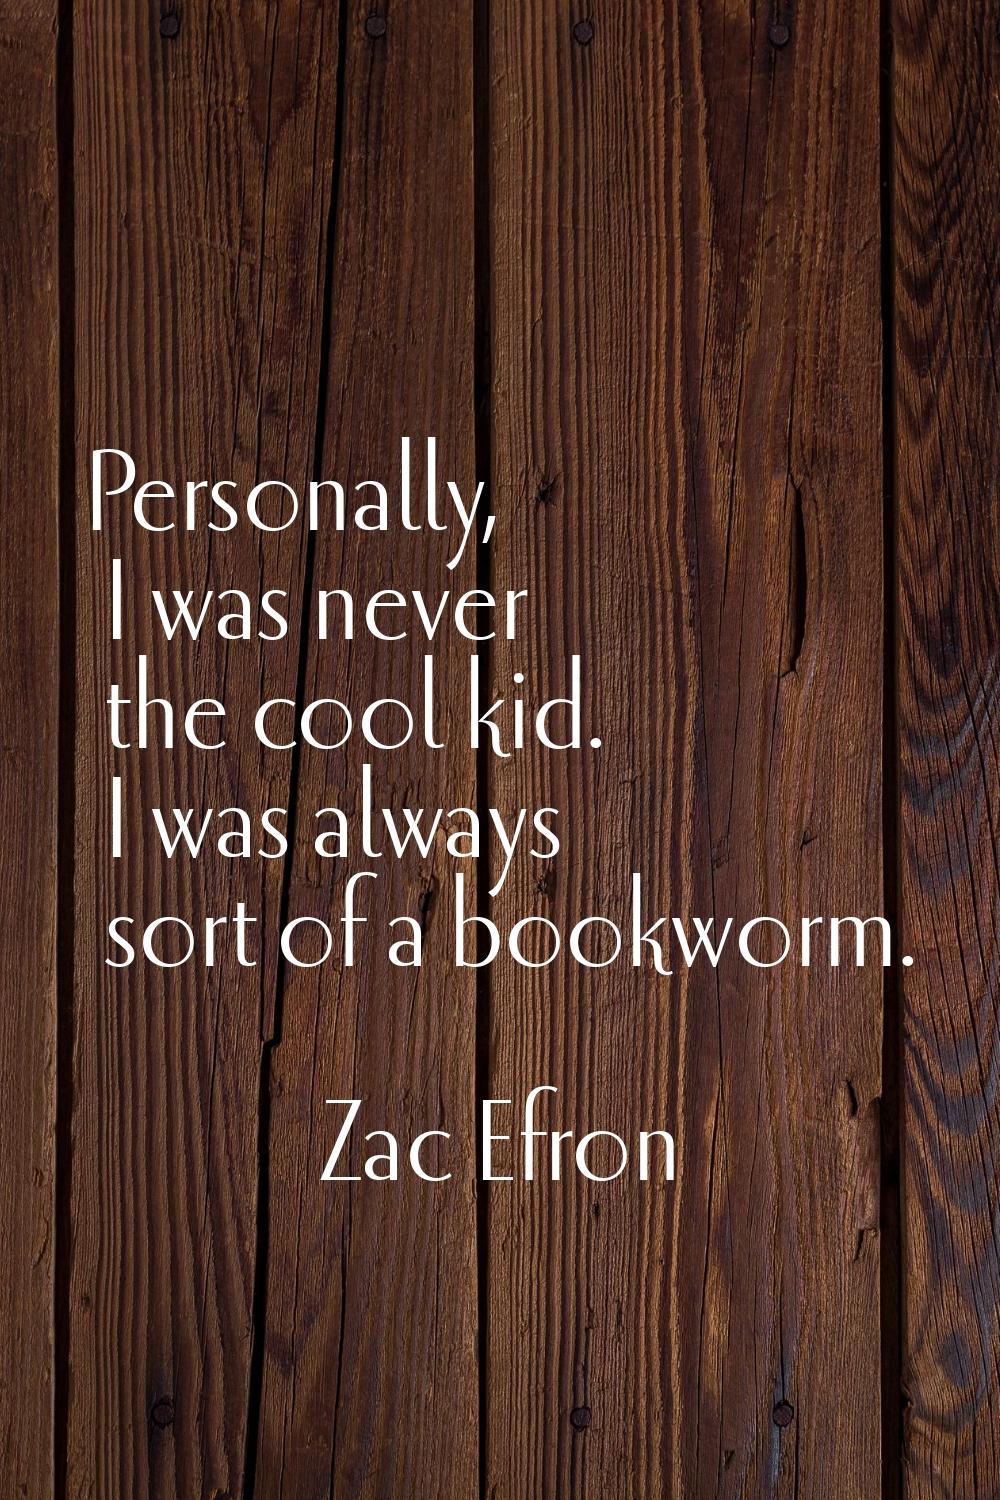 Personally, I was never the cool kid. I was always sort of a bookworm.